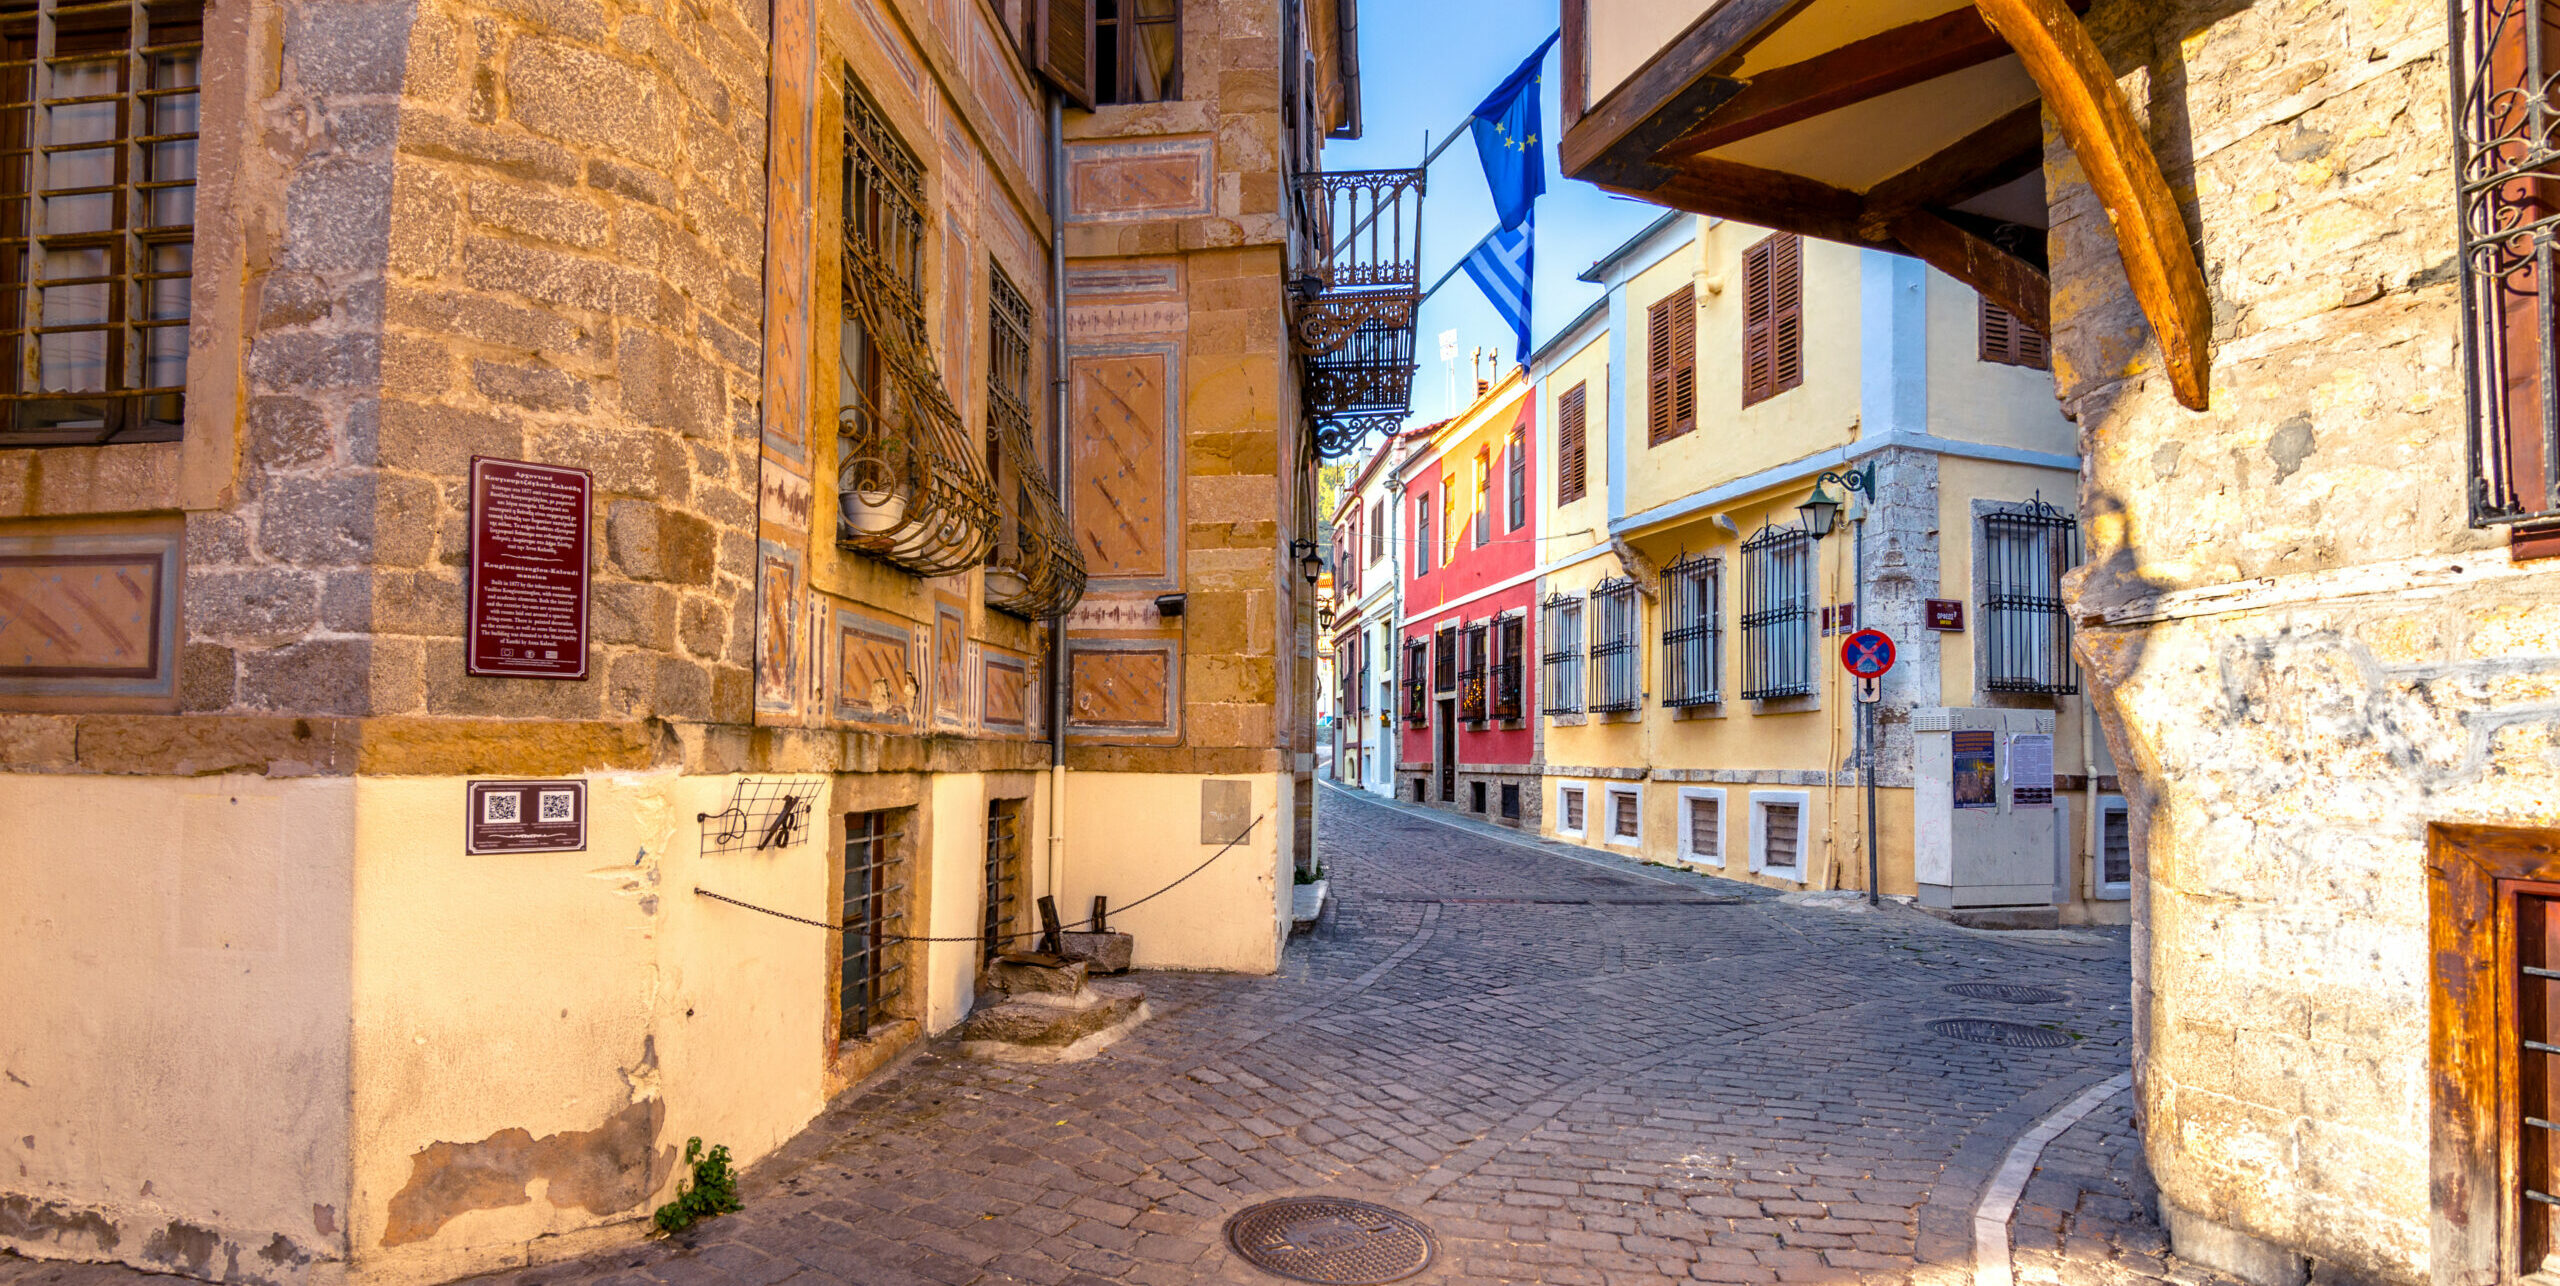 Xanthi: The Old Town is the jewel of Thrace